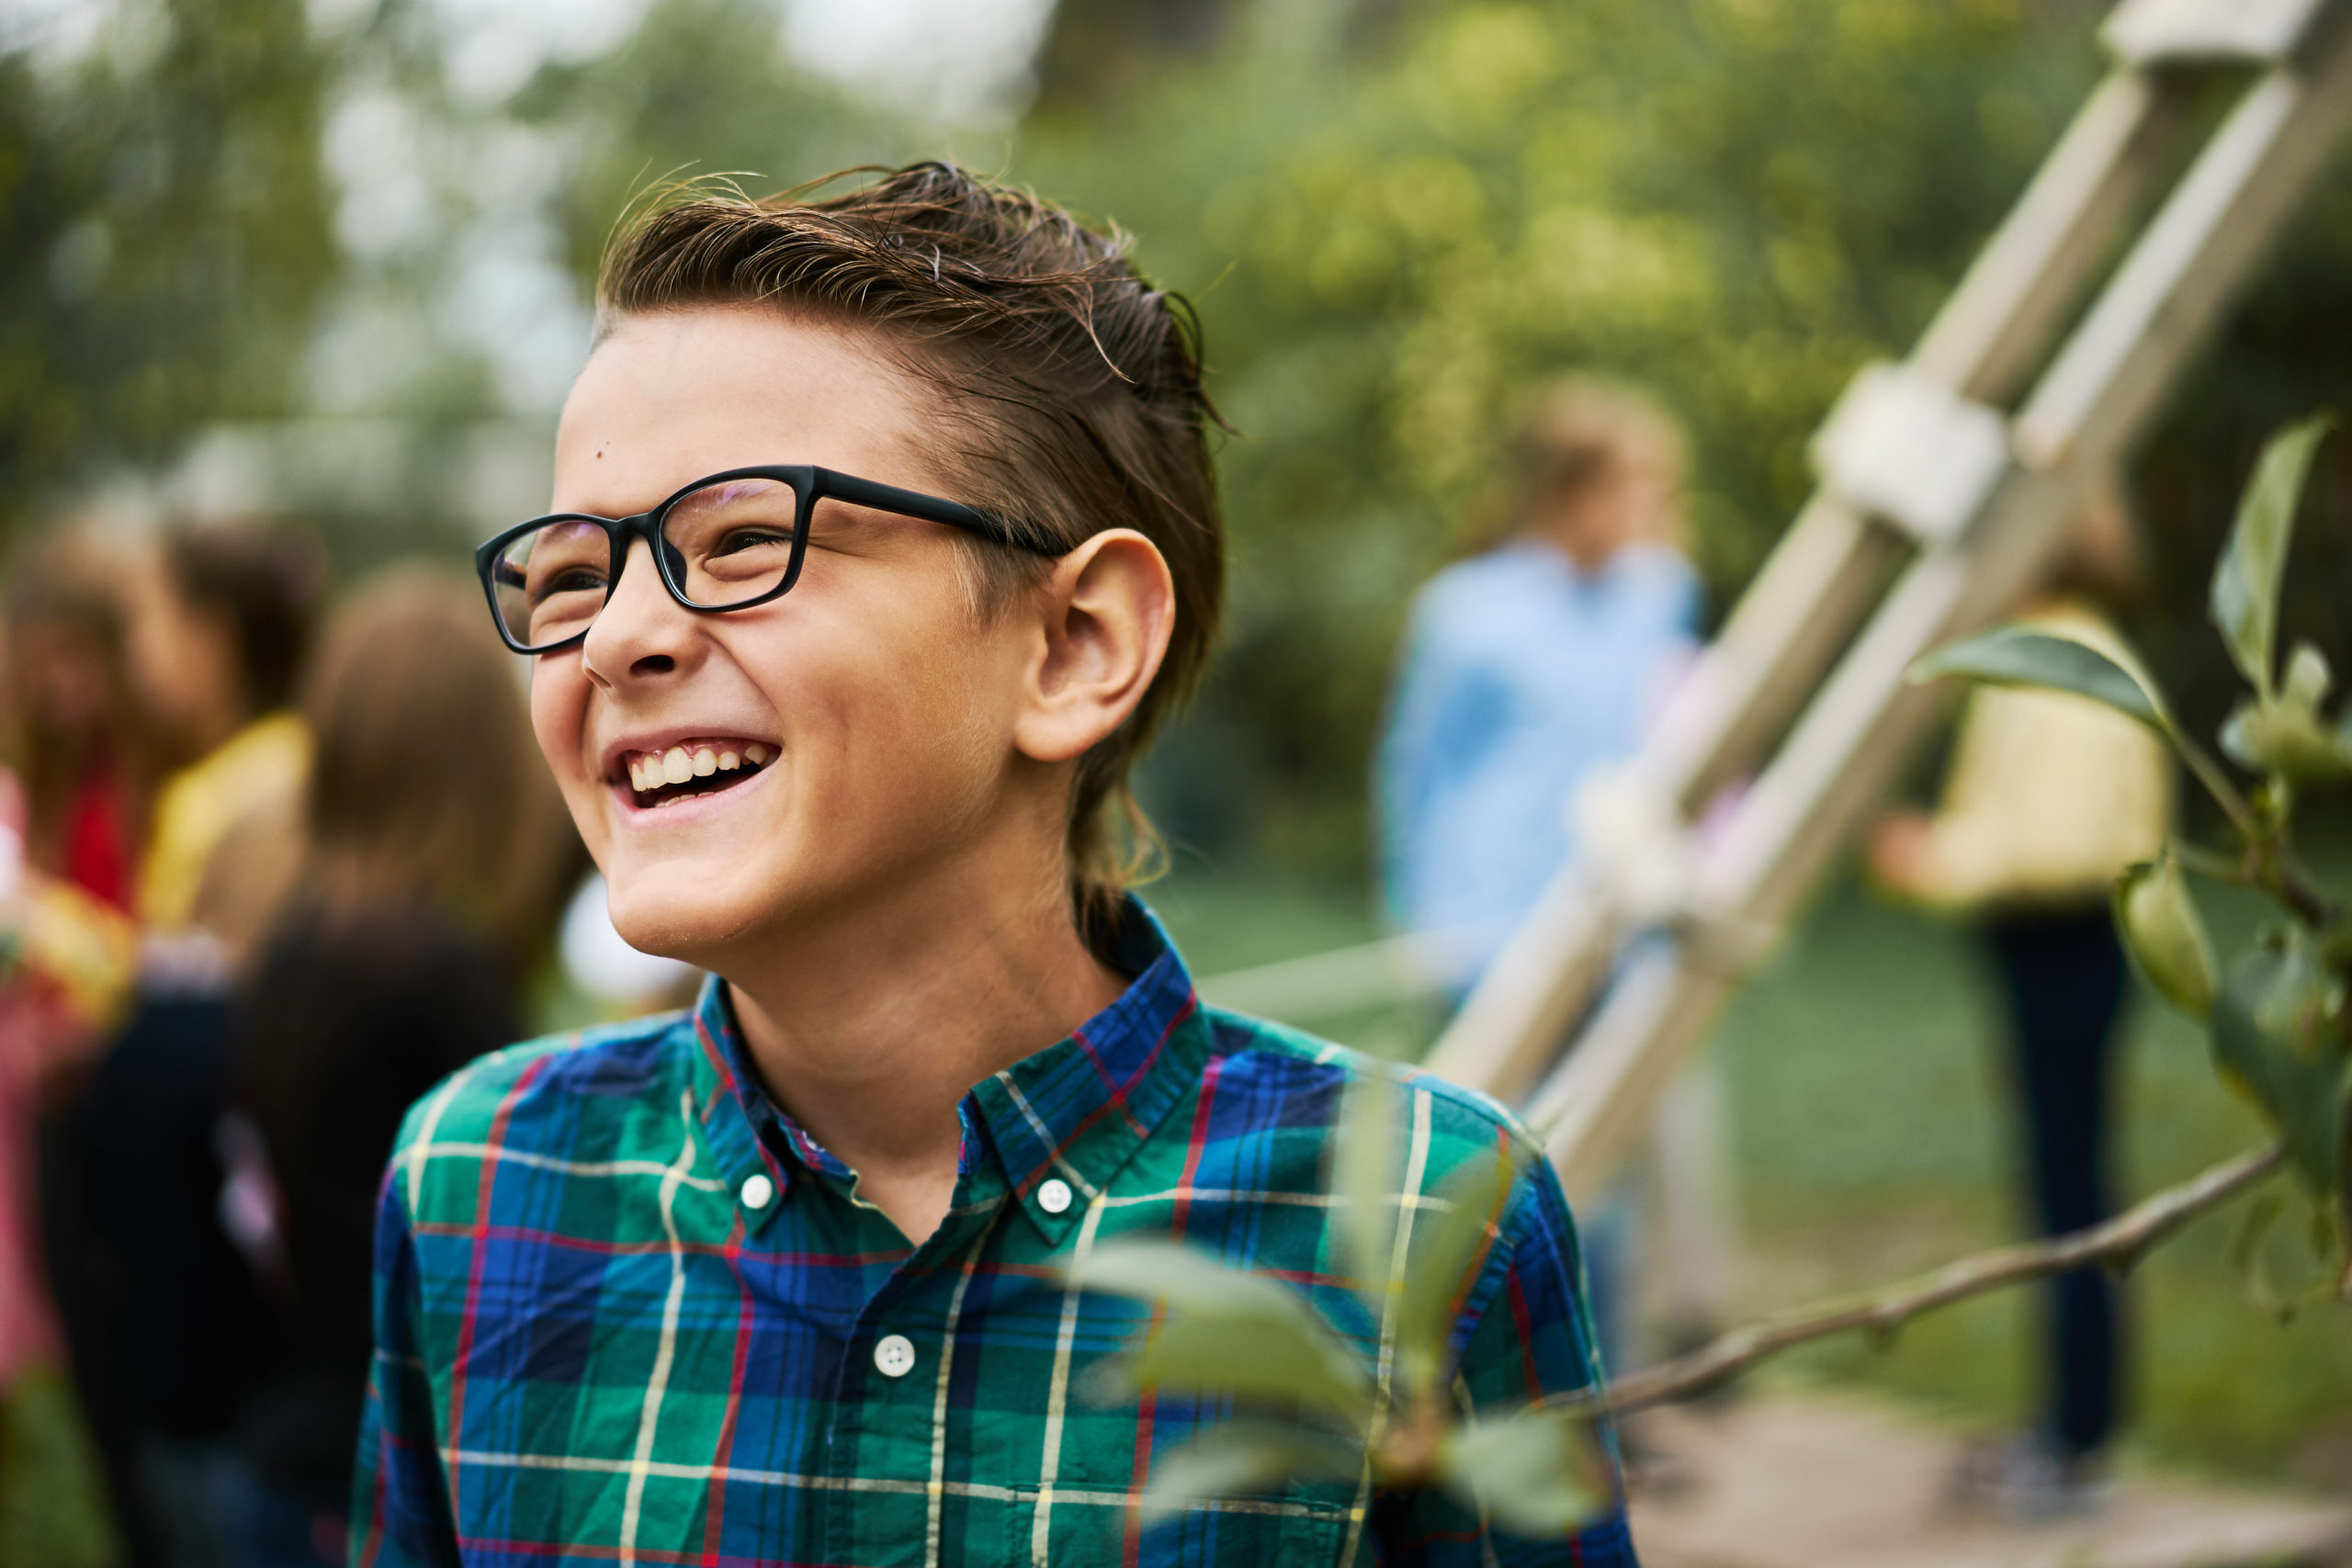 A boy in glasses and a plaid shirt at an outdoor event